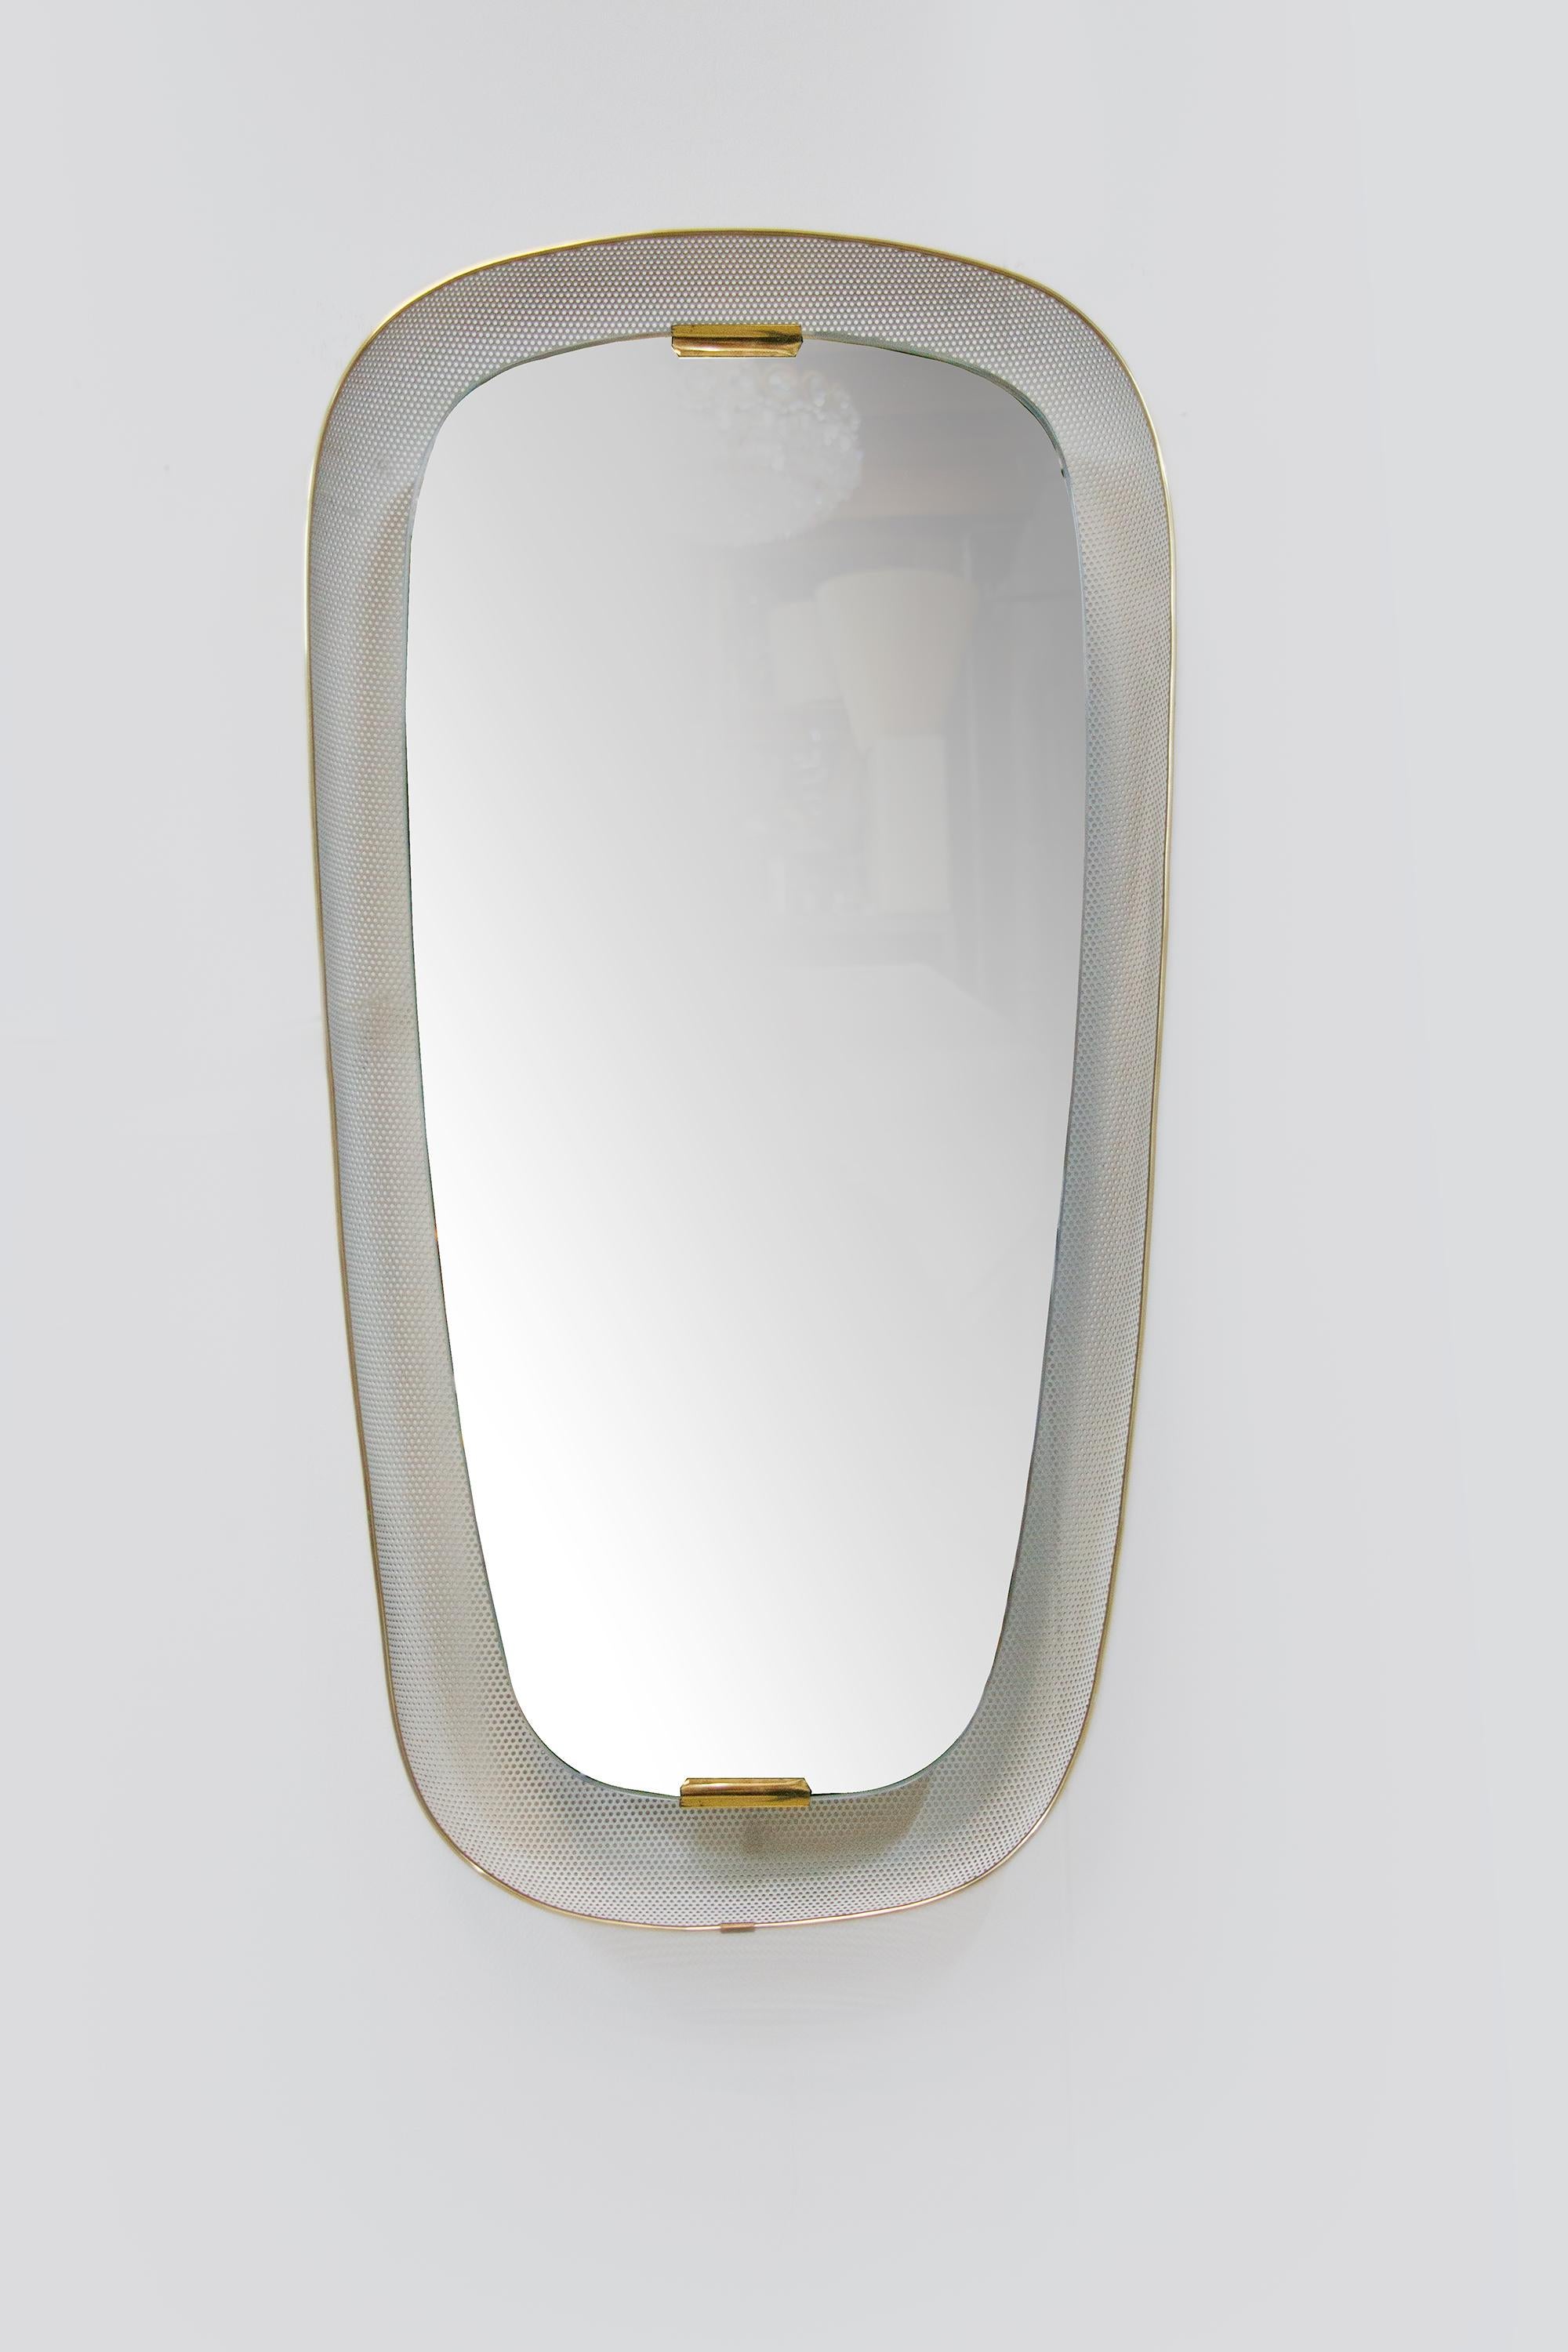 Crystal Large Oval Backlit Mirror Glass and Perforated Metal, Germany 1950s